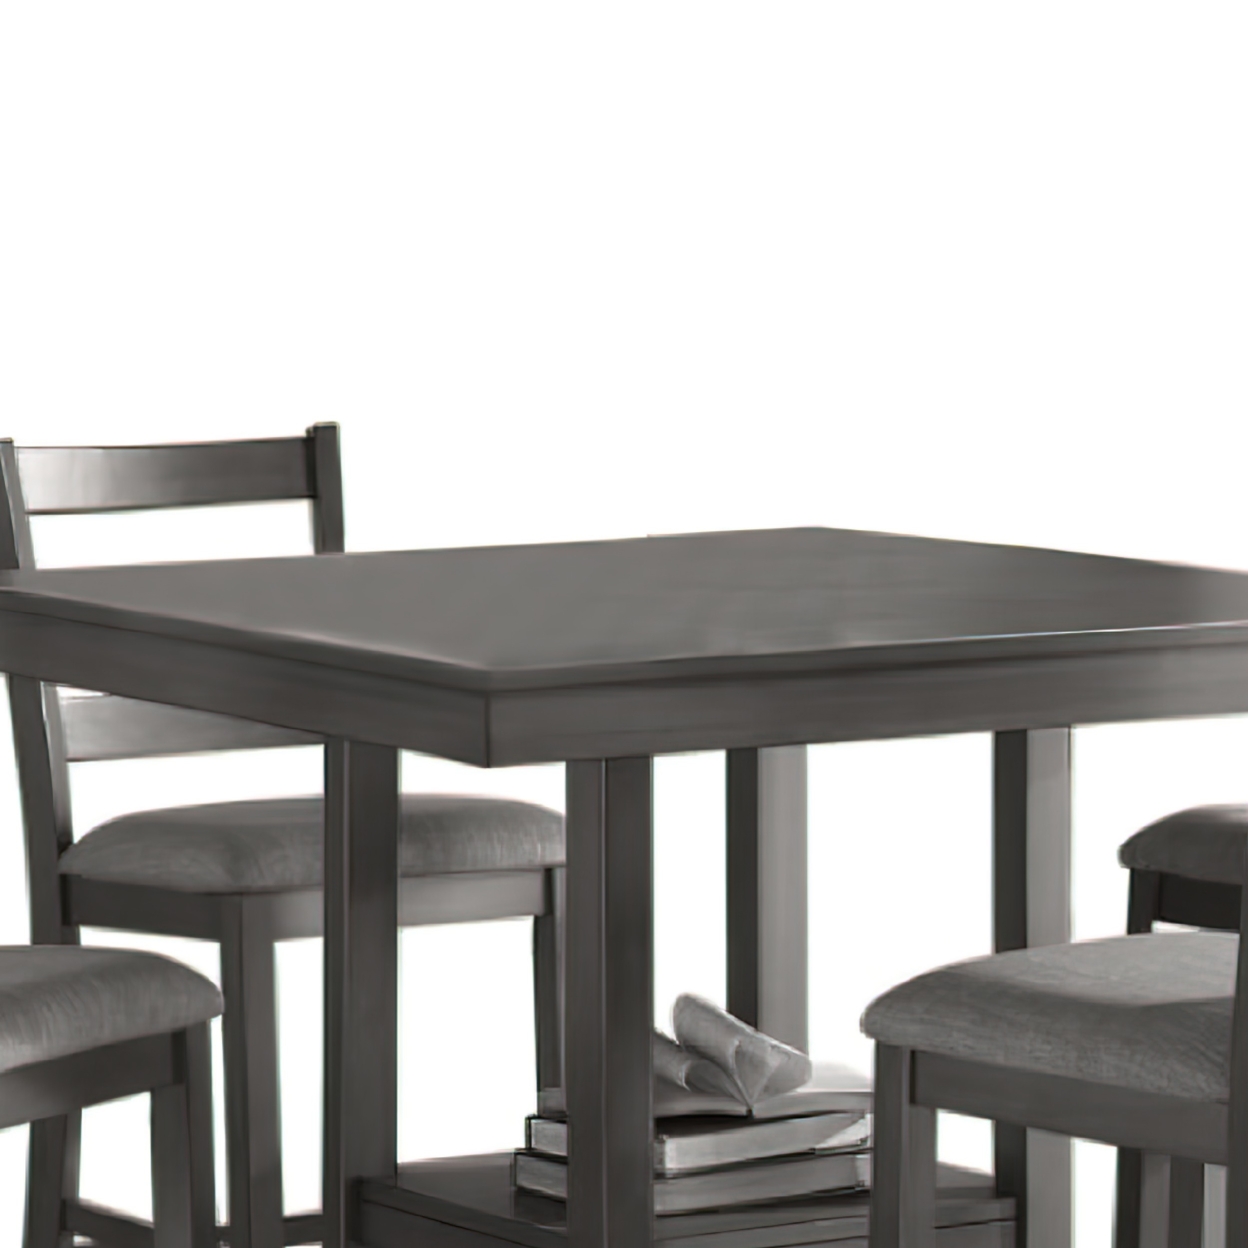 5 Piece Counter Height Dining Set, Table And 4 Chairs, Padded Seats, Gray- Saltoro Sherpi